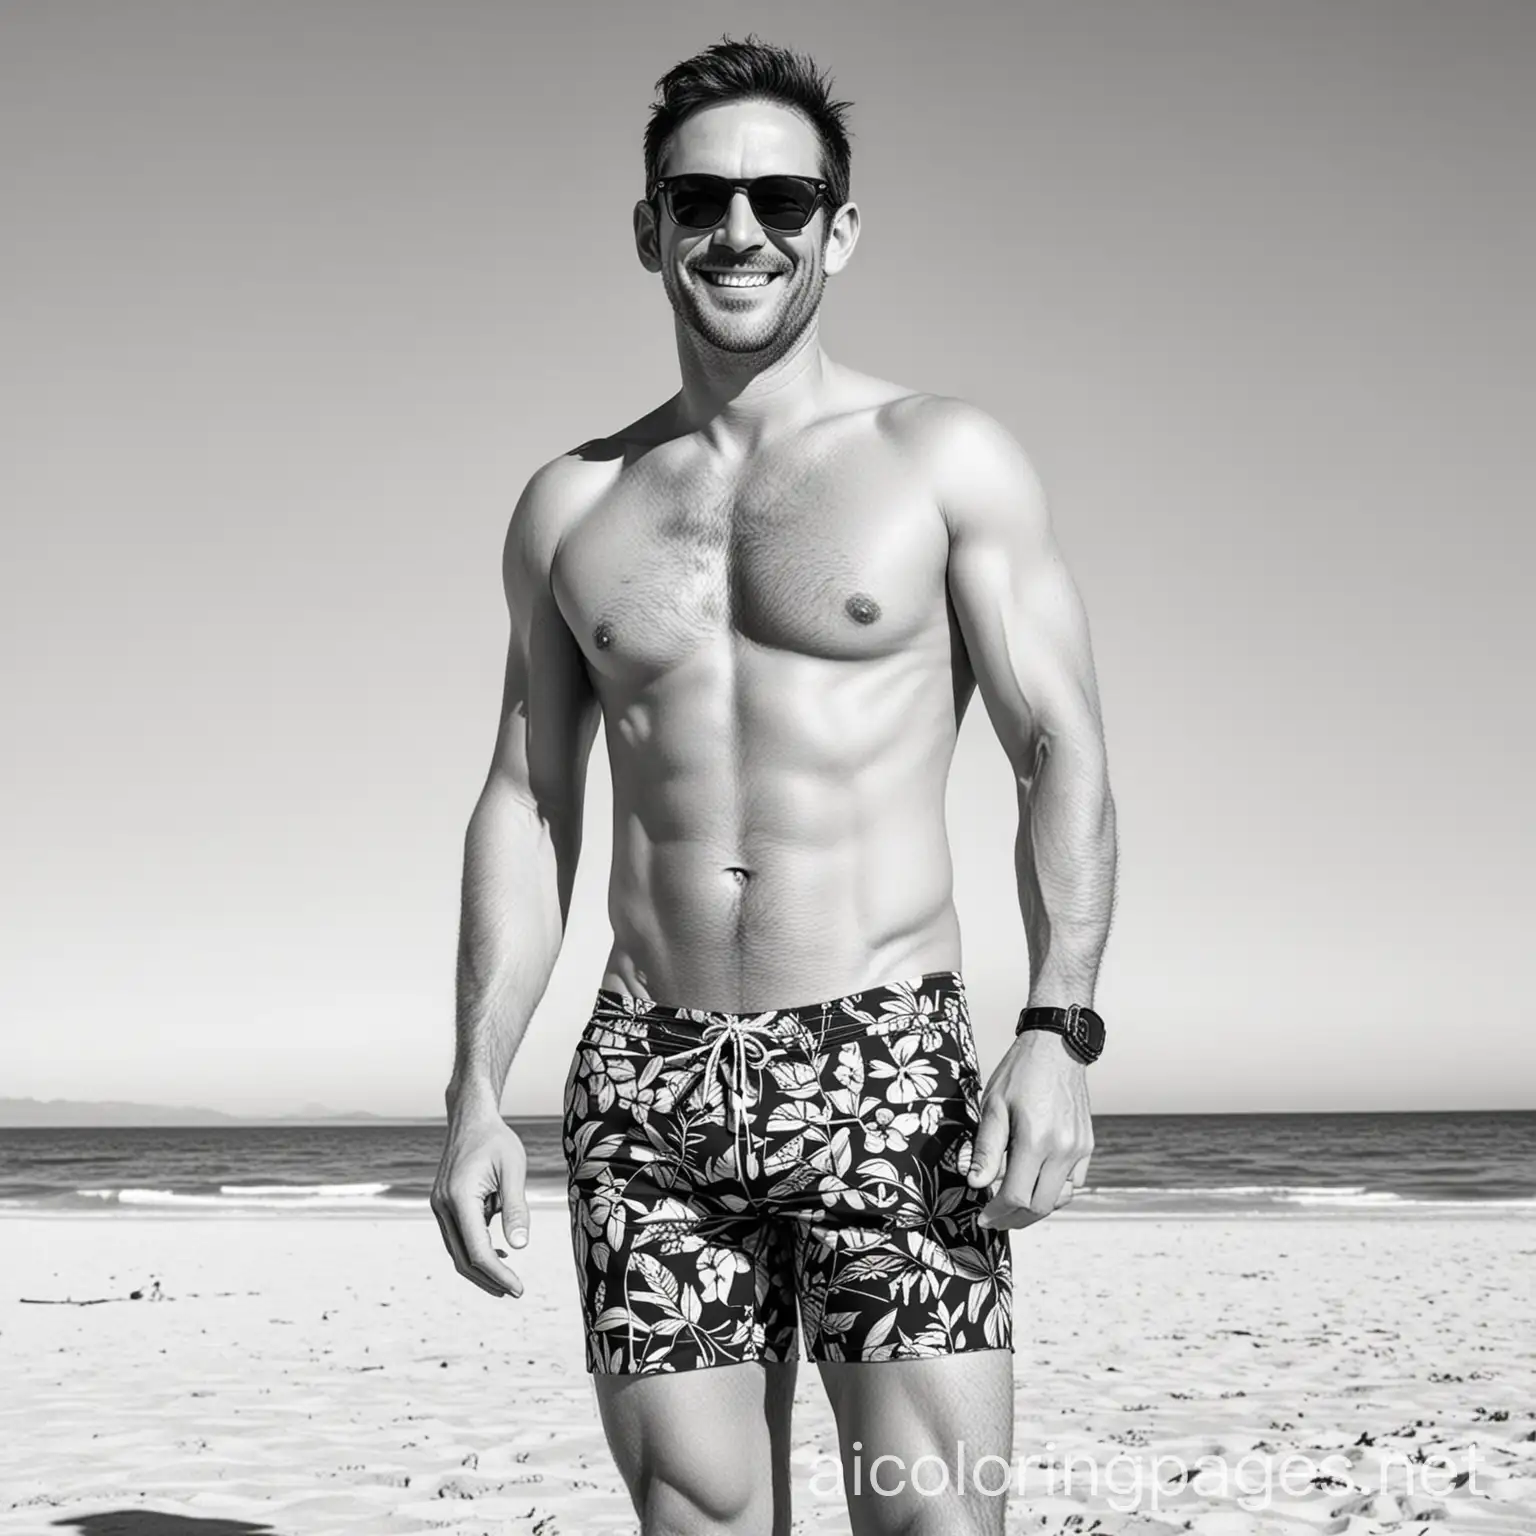 A thin, forty-five-year-old man wearing a swimsuit and sunglasses standing on the beach, smiling., Coloring Page, black and white, line art, white background, Simplicity, Ample White Space. The background of the coloring page is plain white to make it easy for young children to color within the lines. The outlines of all the subjects are easy to distinguish, making it simple for kids to color without too much difficulty